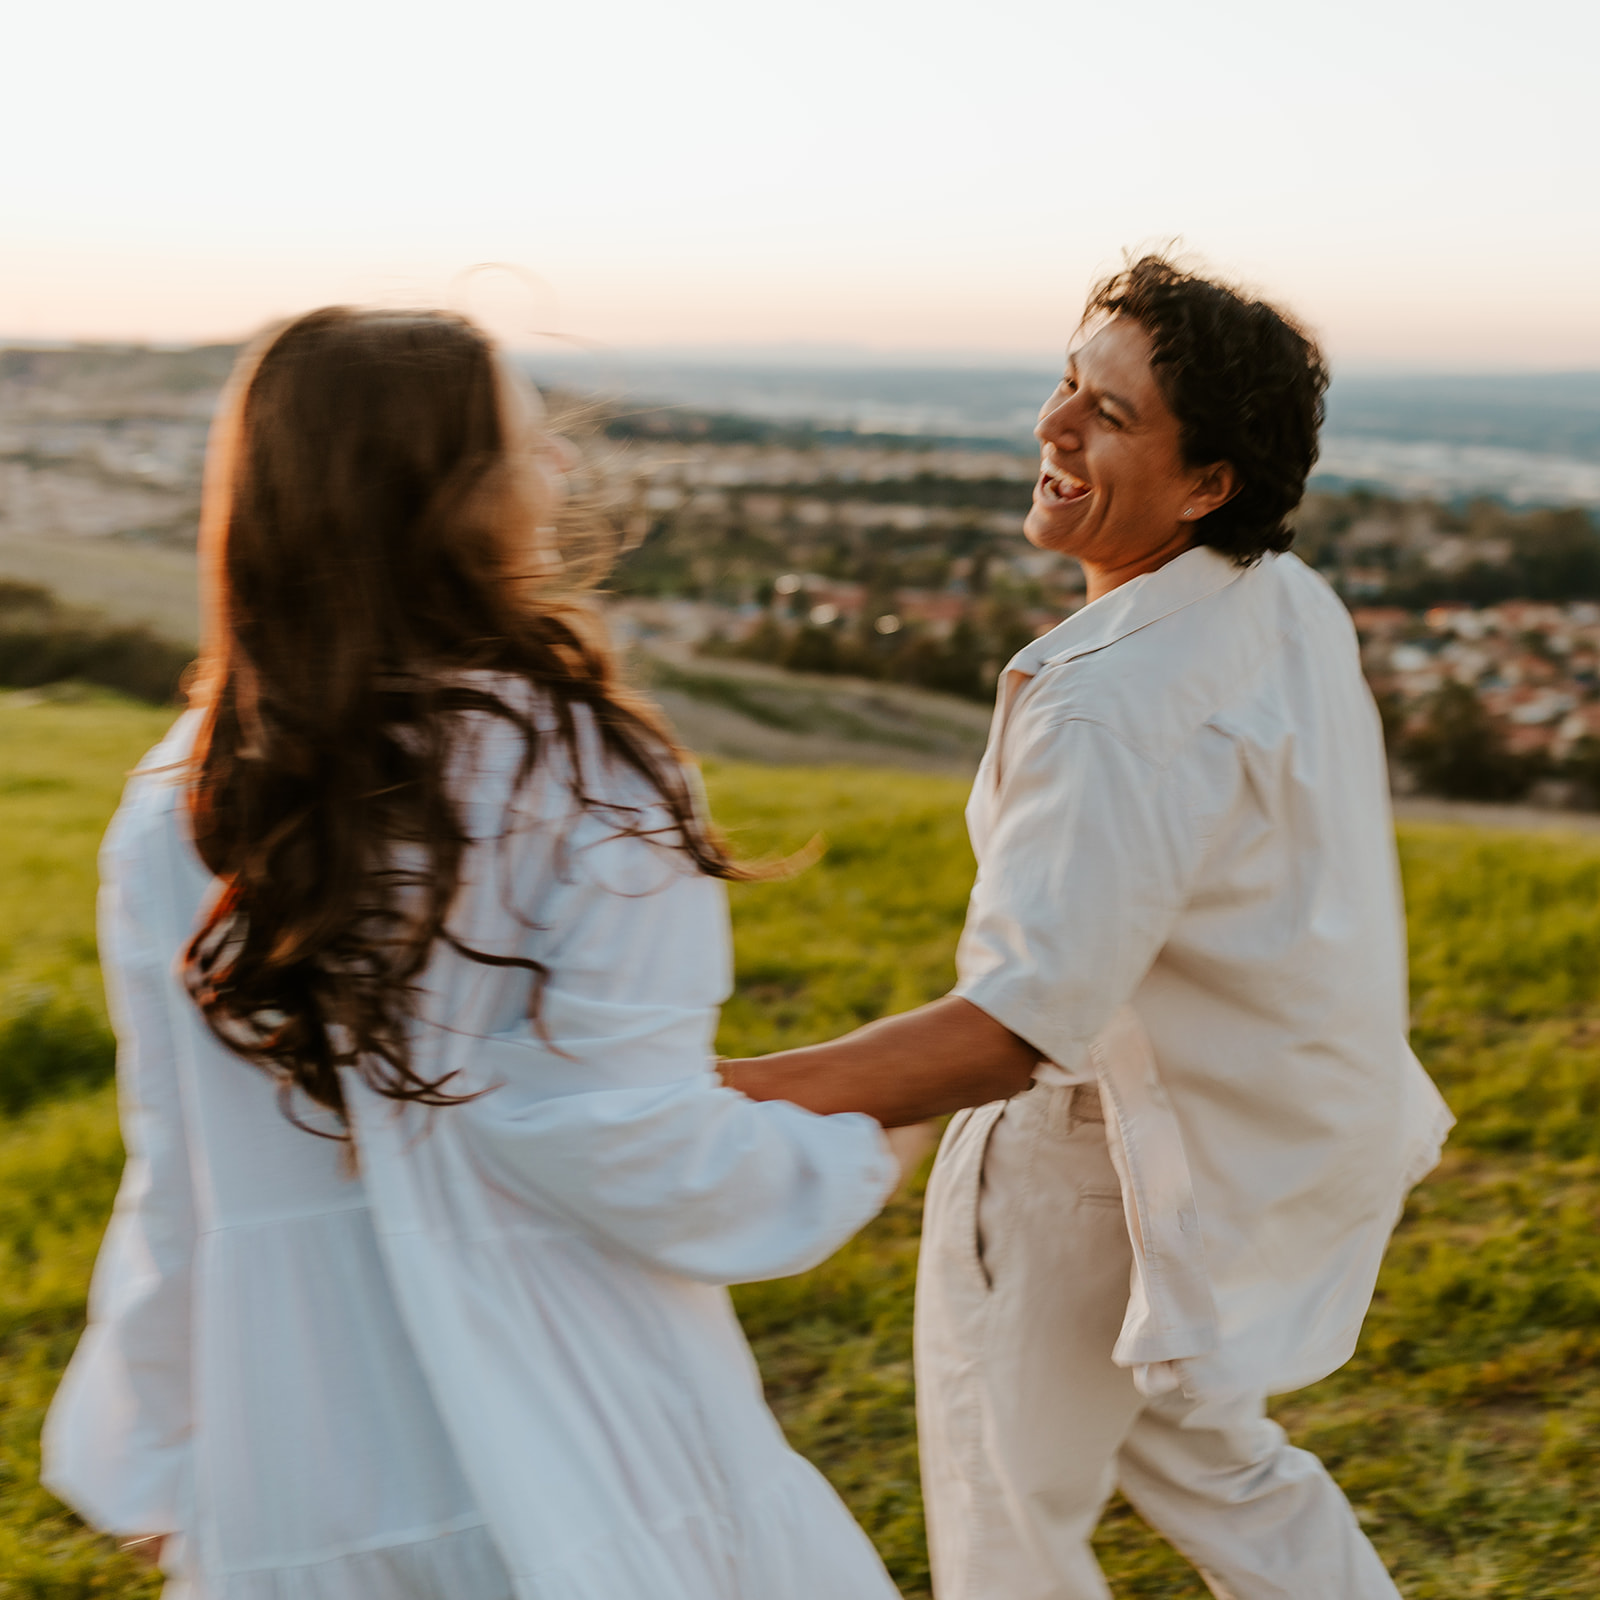 A couple in linen clothes laughs together in the California hills.